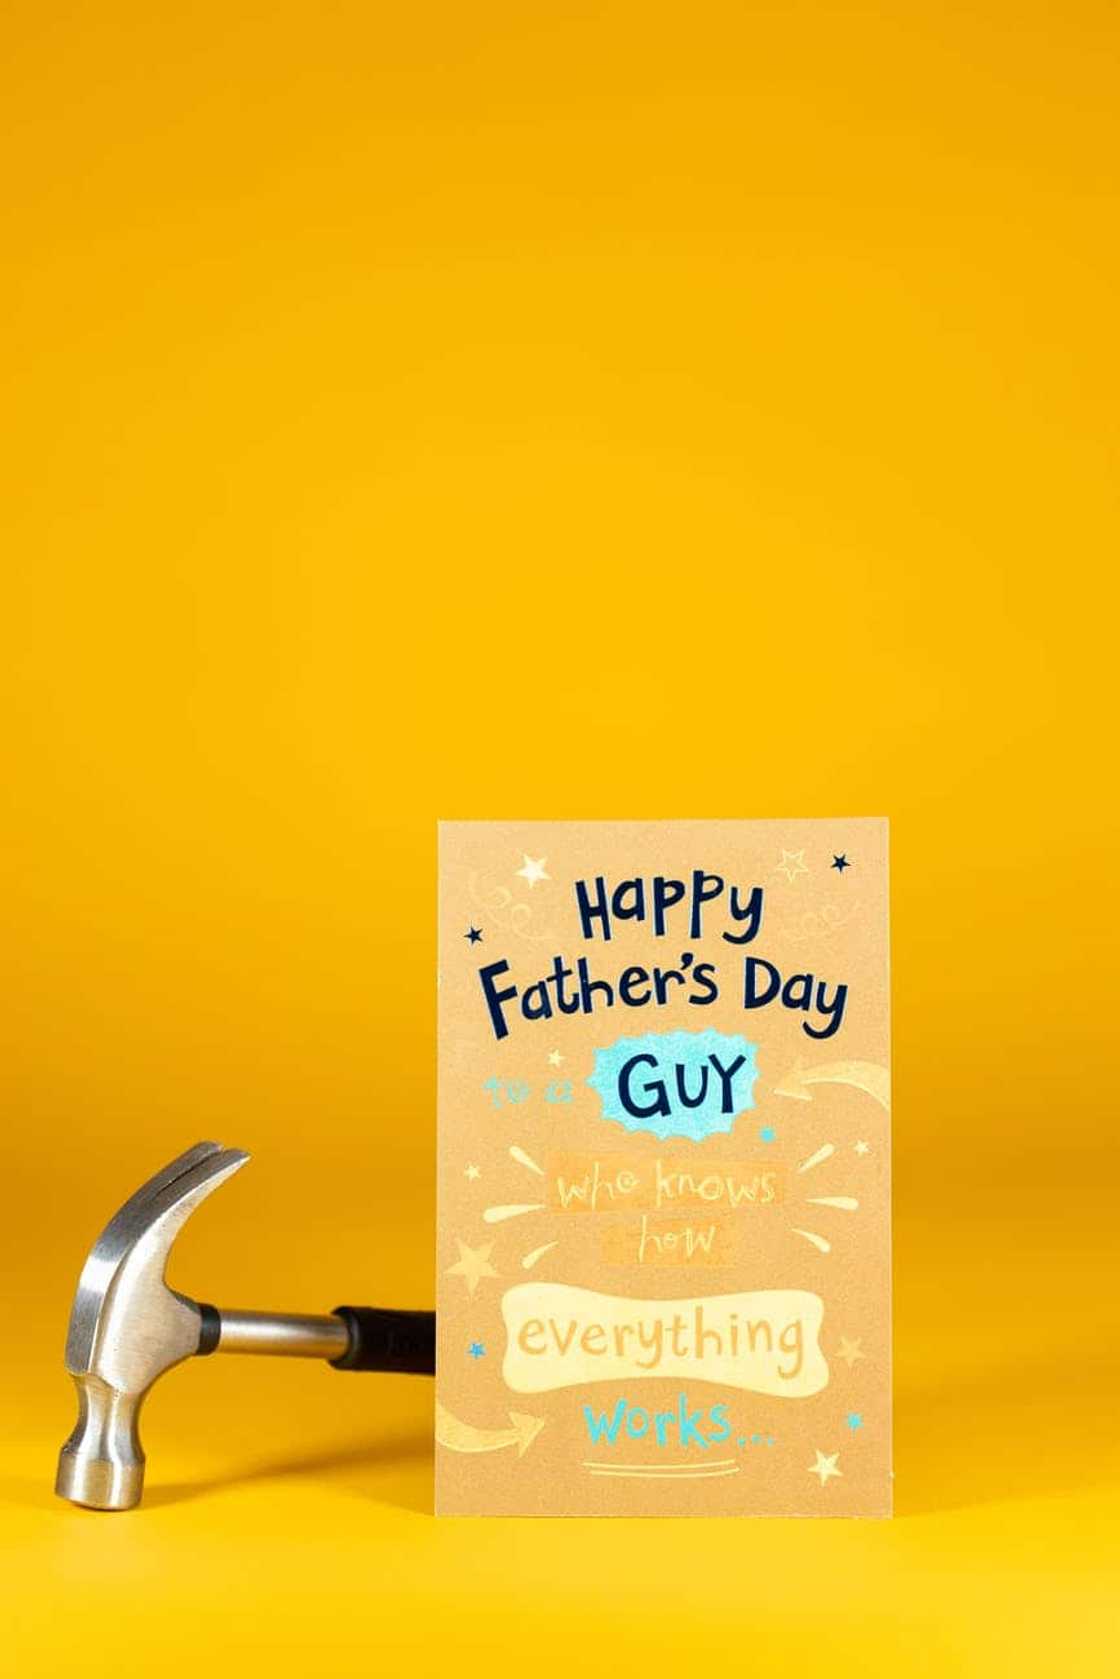 The affirmative Father's Day picture